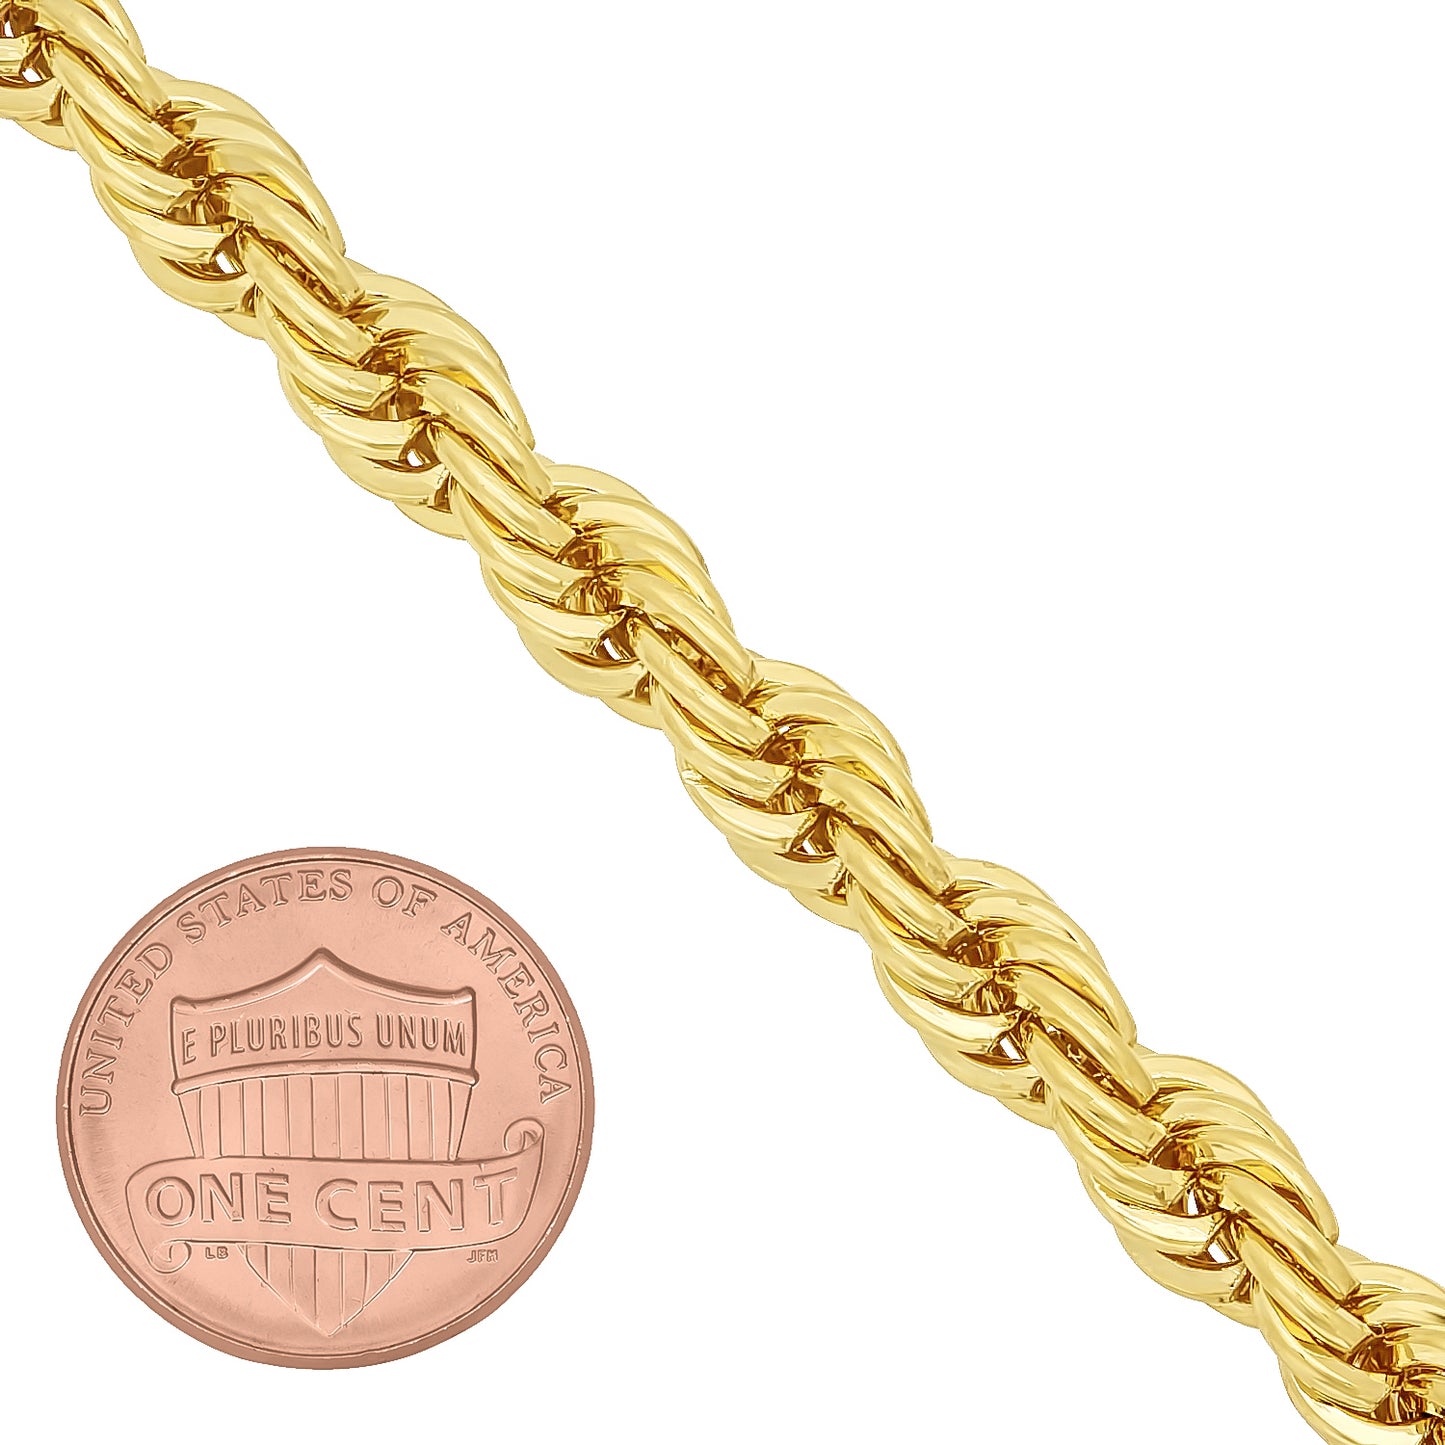 2mm-6mm 14k Gold Plated Twisted Rope Chain Bracelets 7-9" Made in USA + Jewelry Cloth & Pouch (SKU: GL-ROPE-BRACELETS)